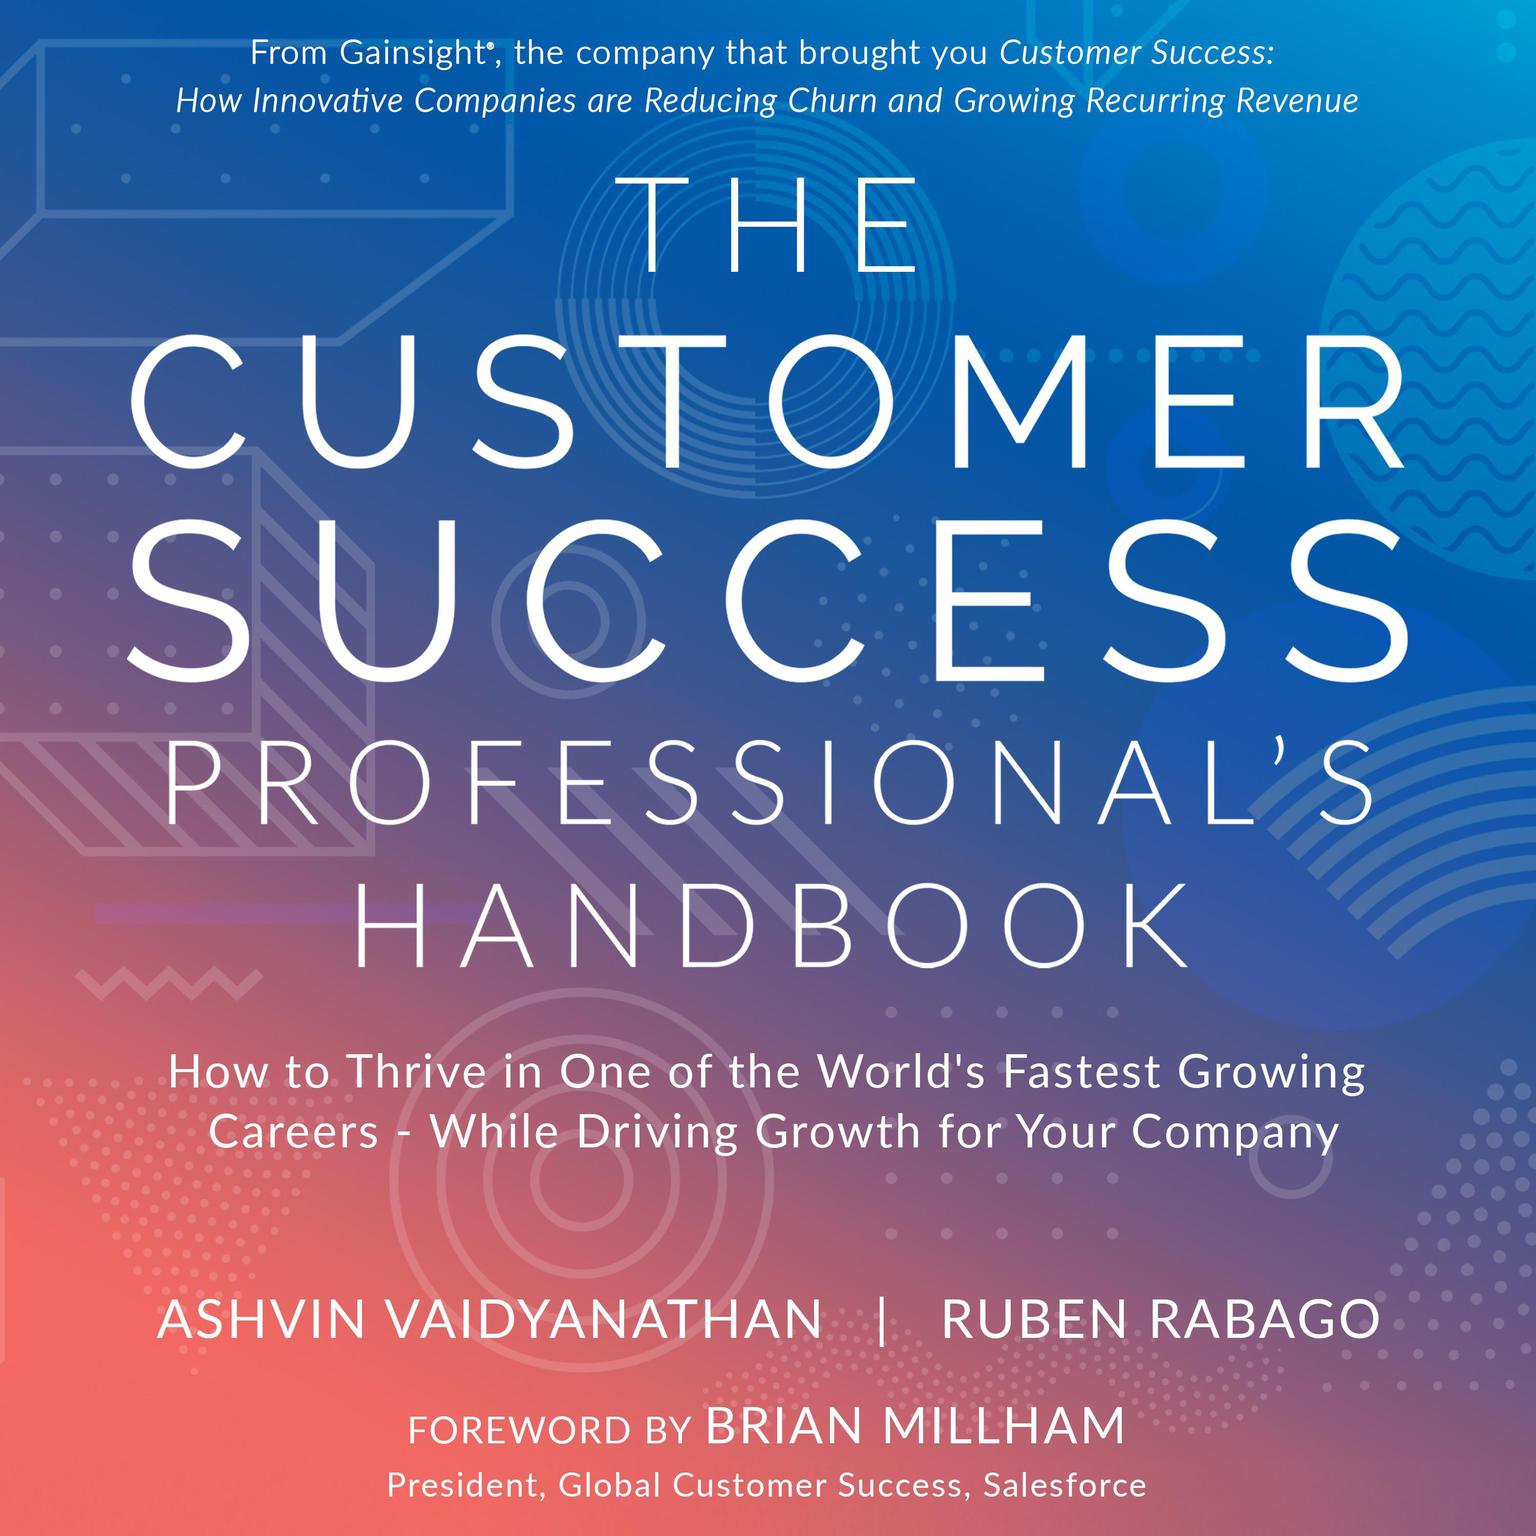 The Customer Success Professionals Handbook: How to Thrive in One of the World’s Fastest Growing Careers - While Driving Growth For Your Company Audiobook, by Ashvin Vaidyanathan